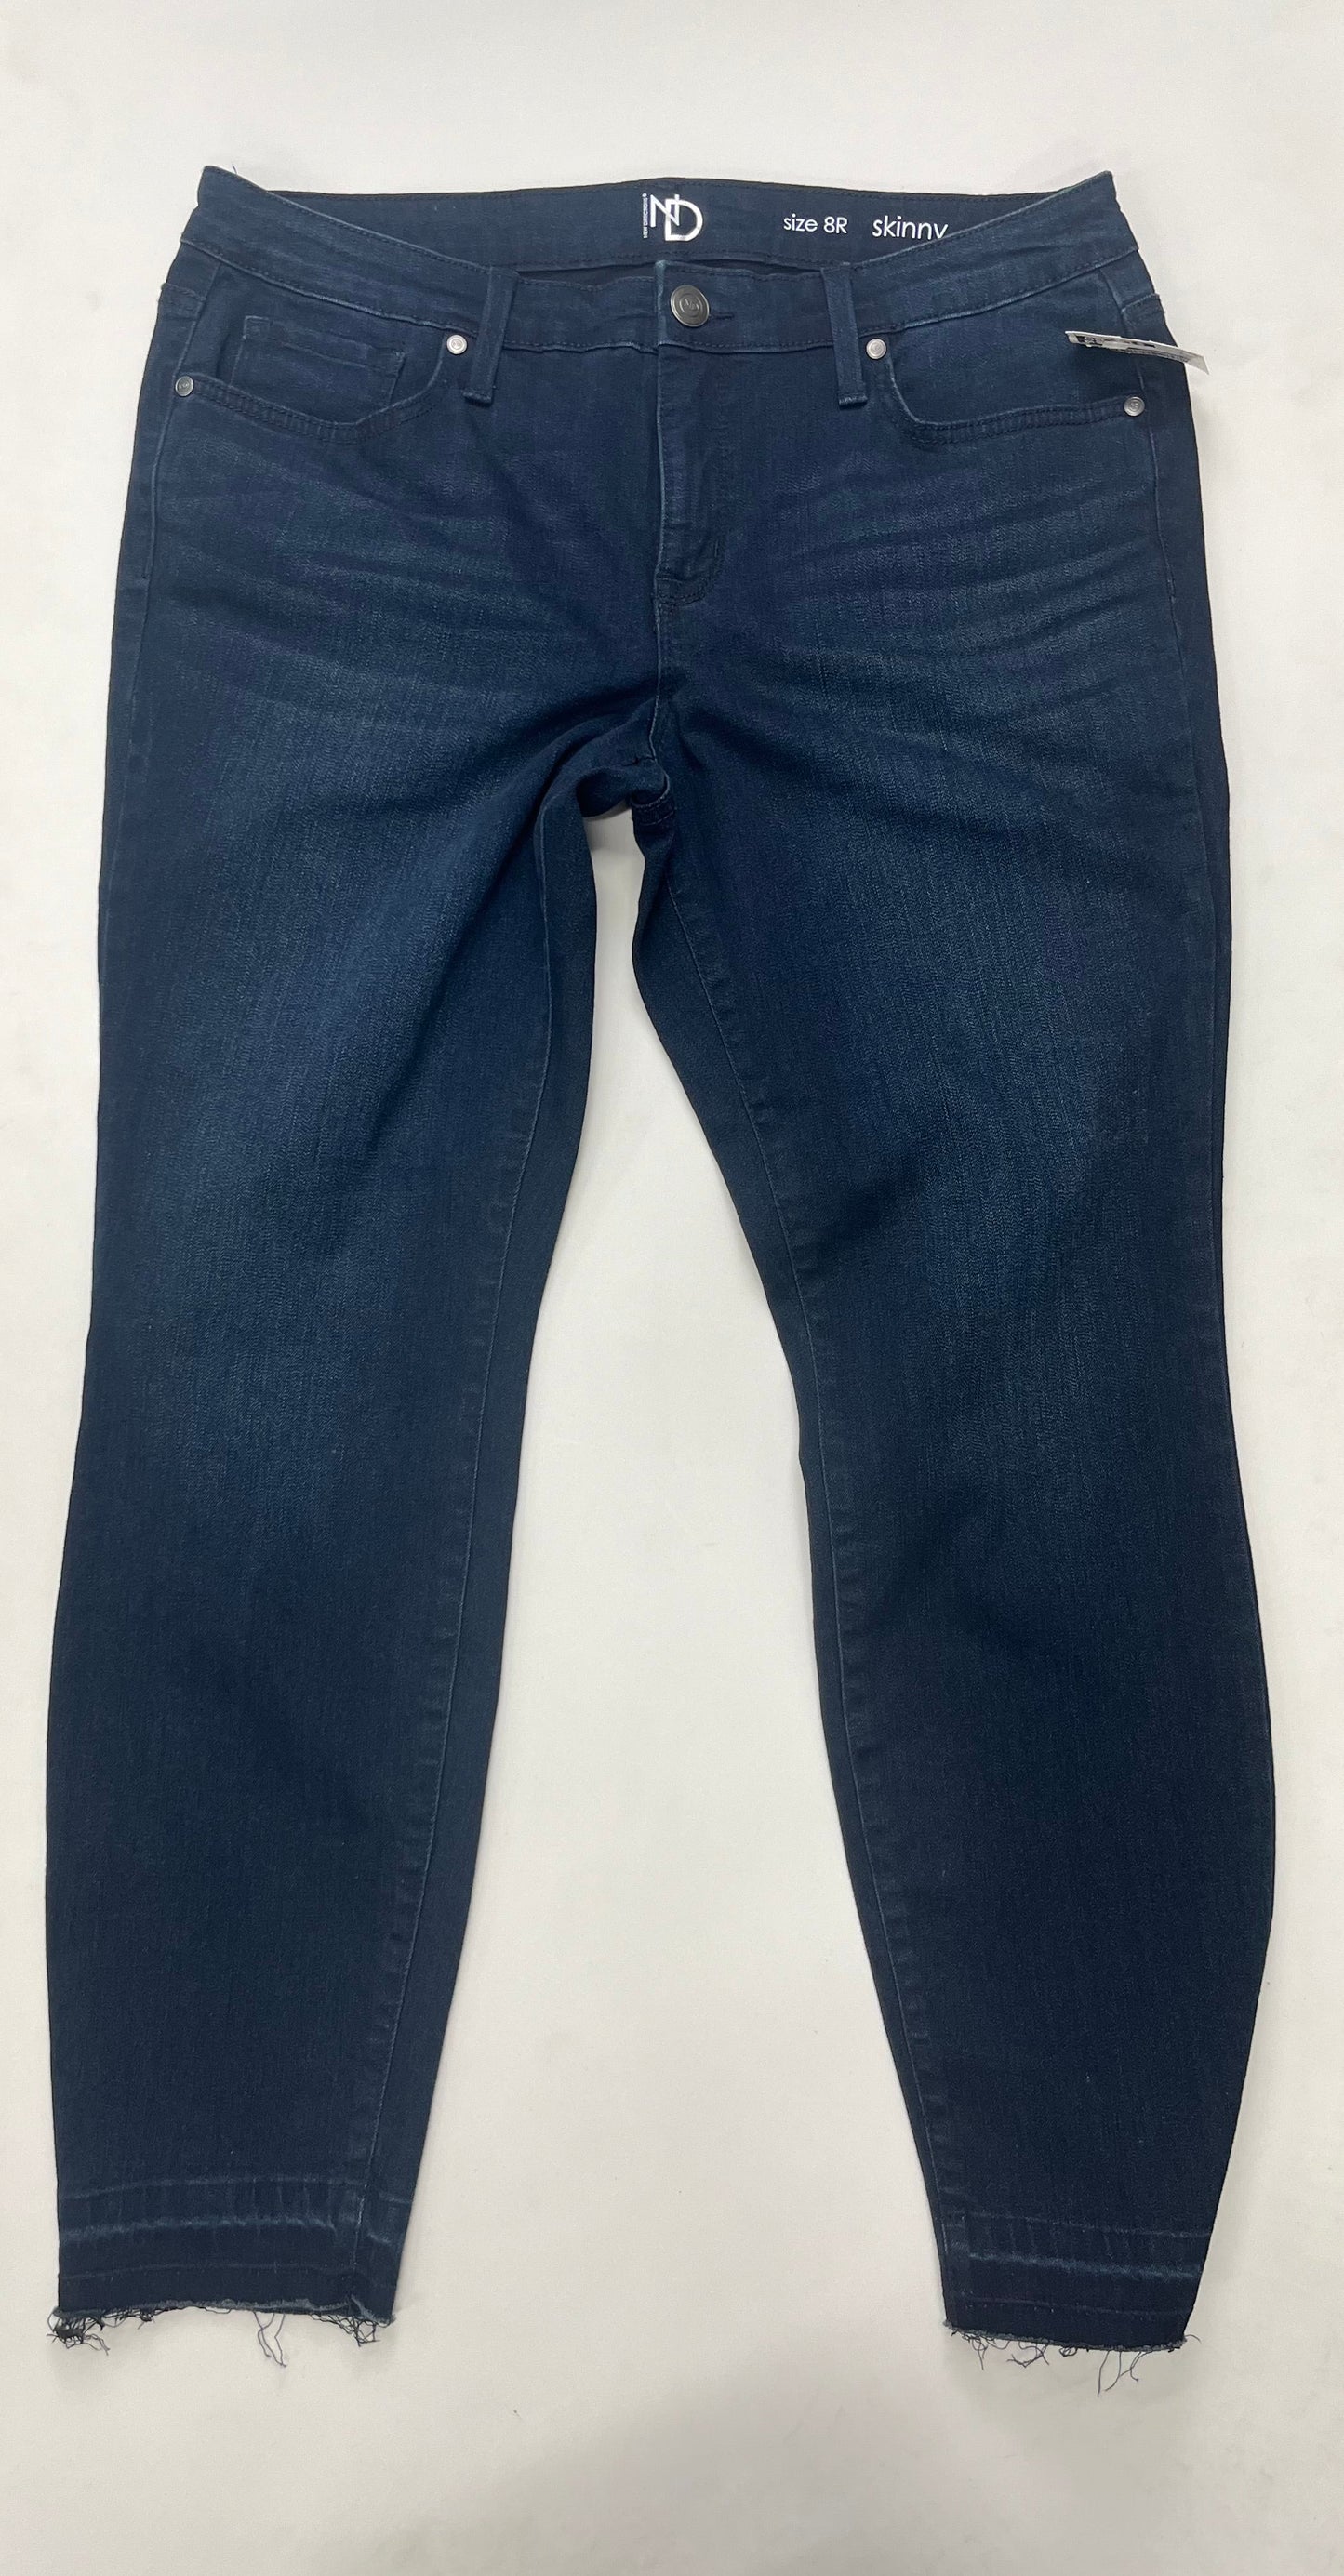 Denim Jeans New Directions, Size 8